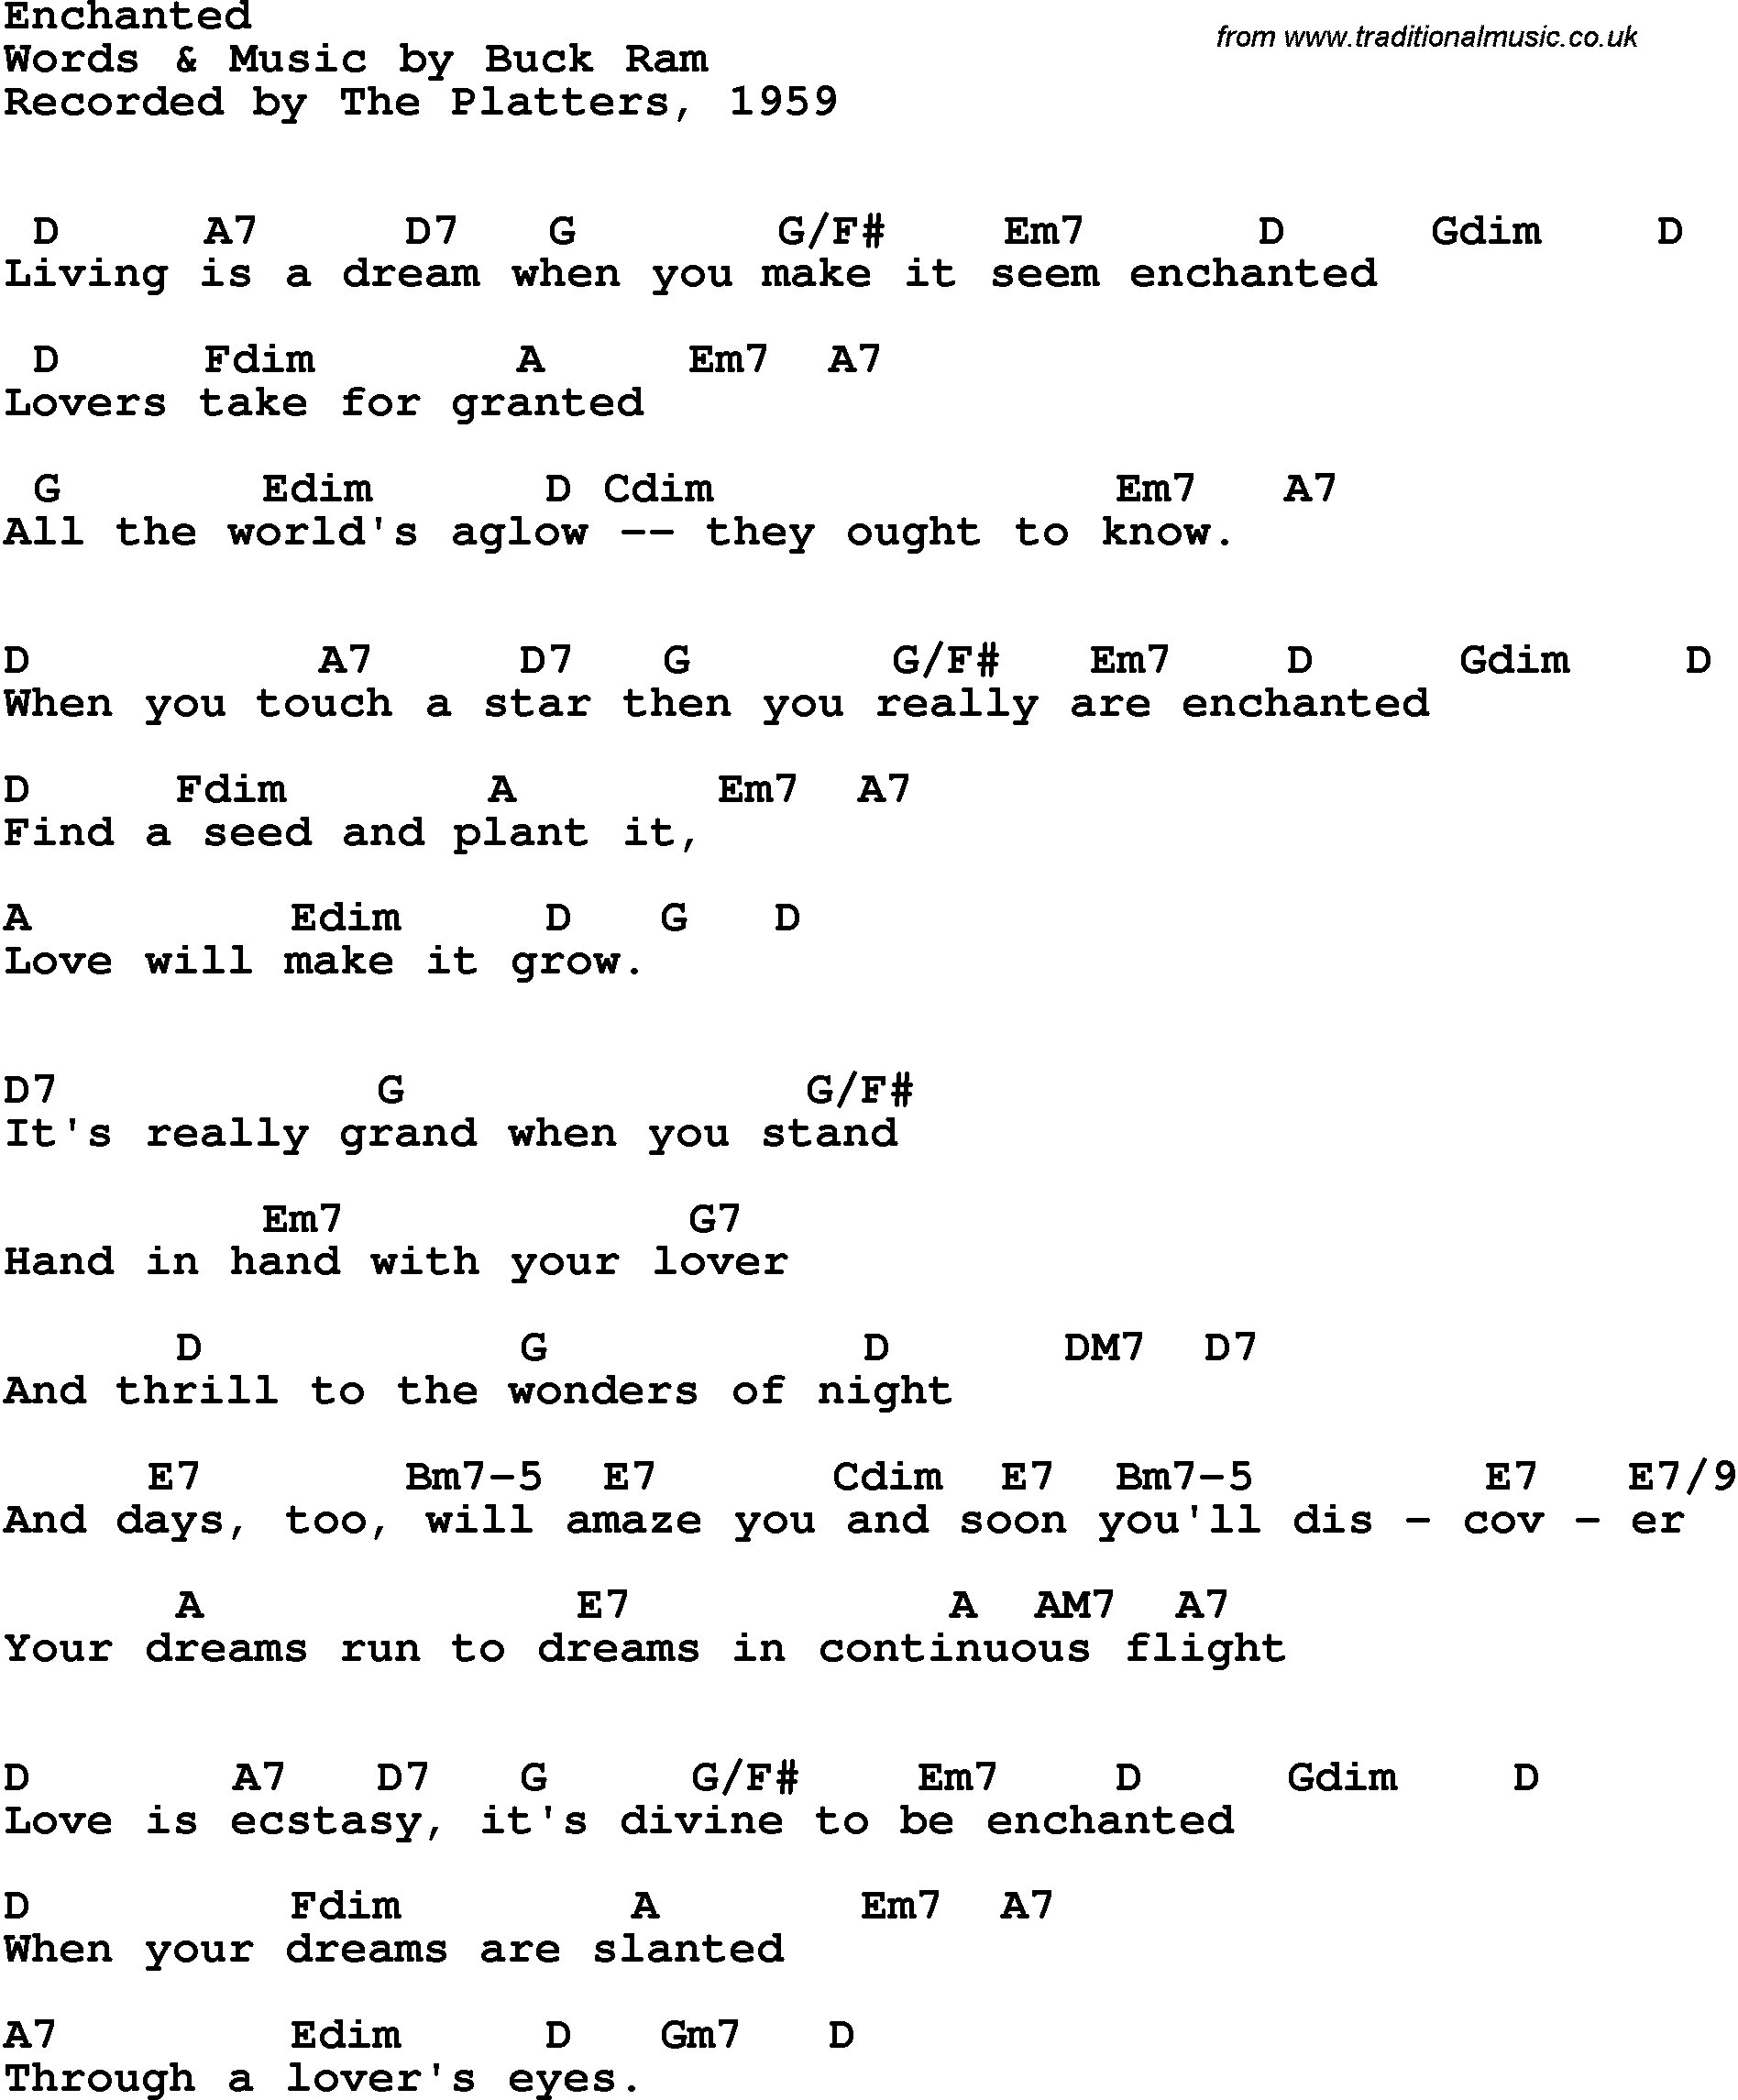 Song Lyrics with guitar chords for Enchanted - The Platters, 1959